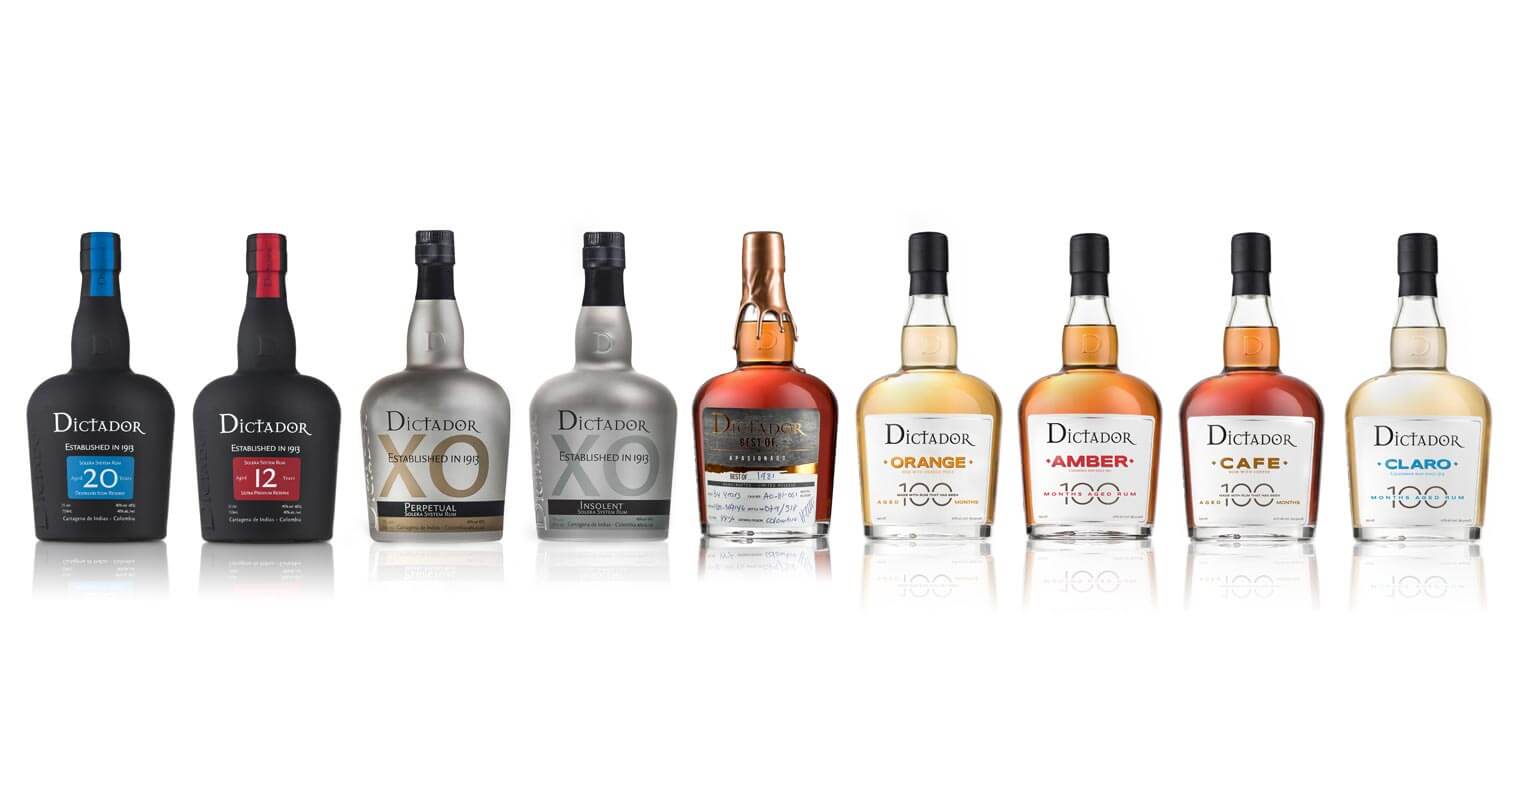 Dictador Luxury Colombian Spirits Appoints 375 Park Avenue US Importer, featured image